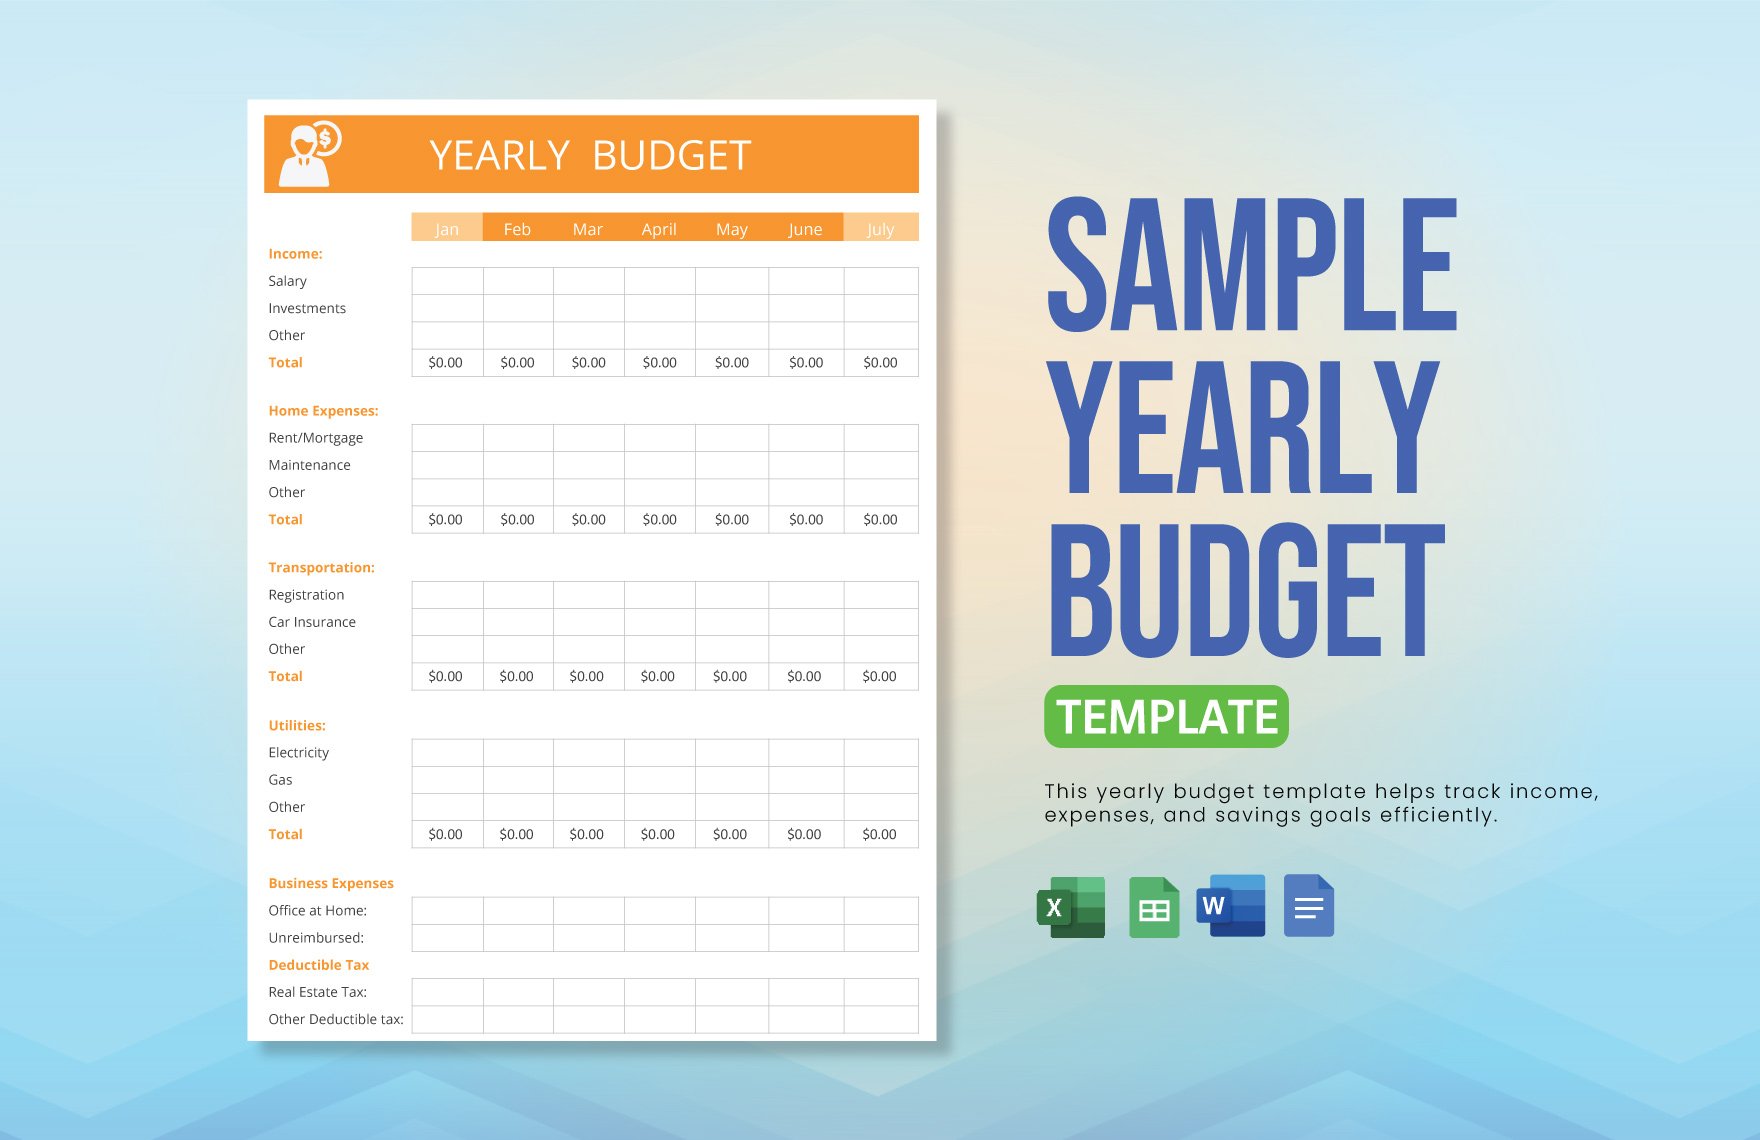 Sample Yearly Budget Template in Word, Google Docs, Excel, Google Sheets